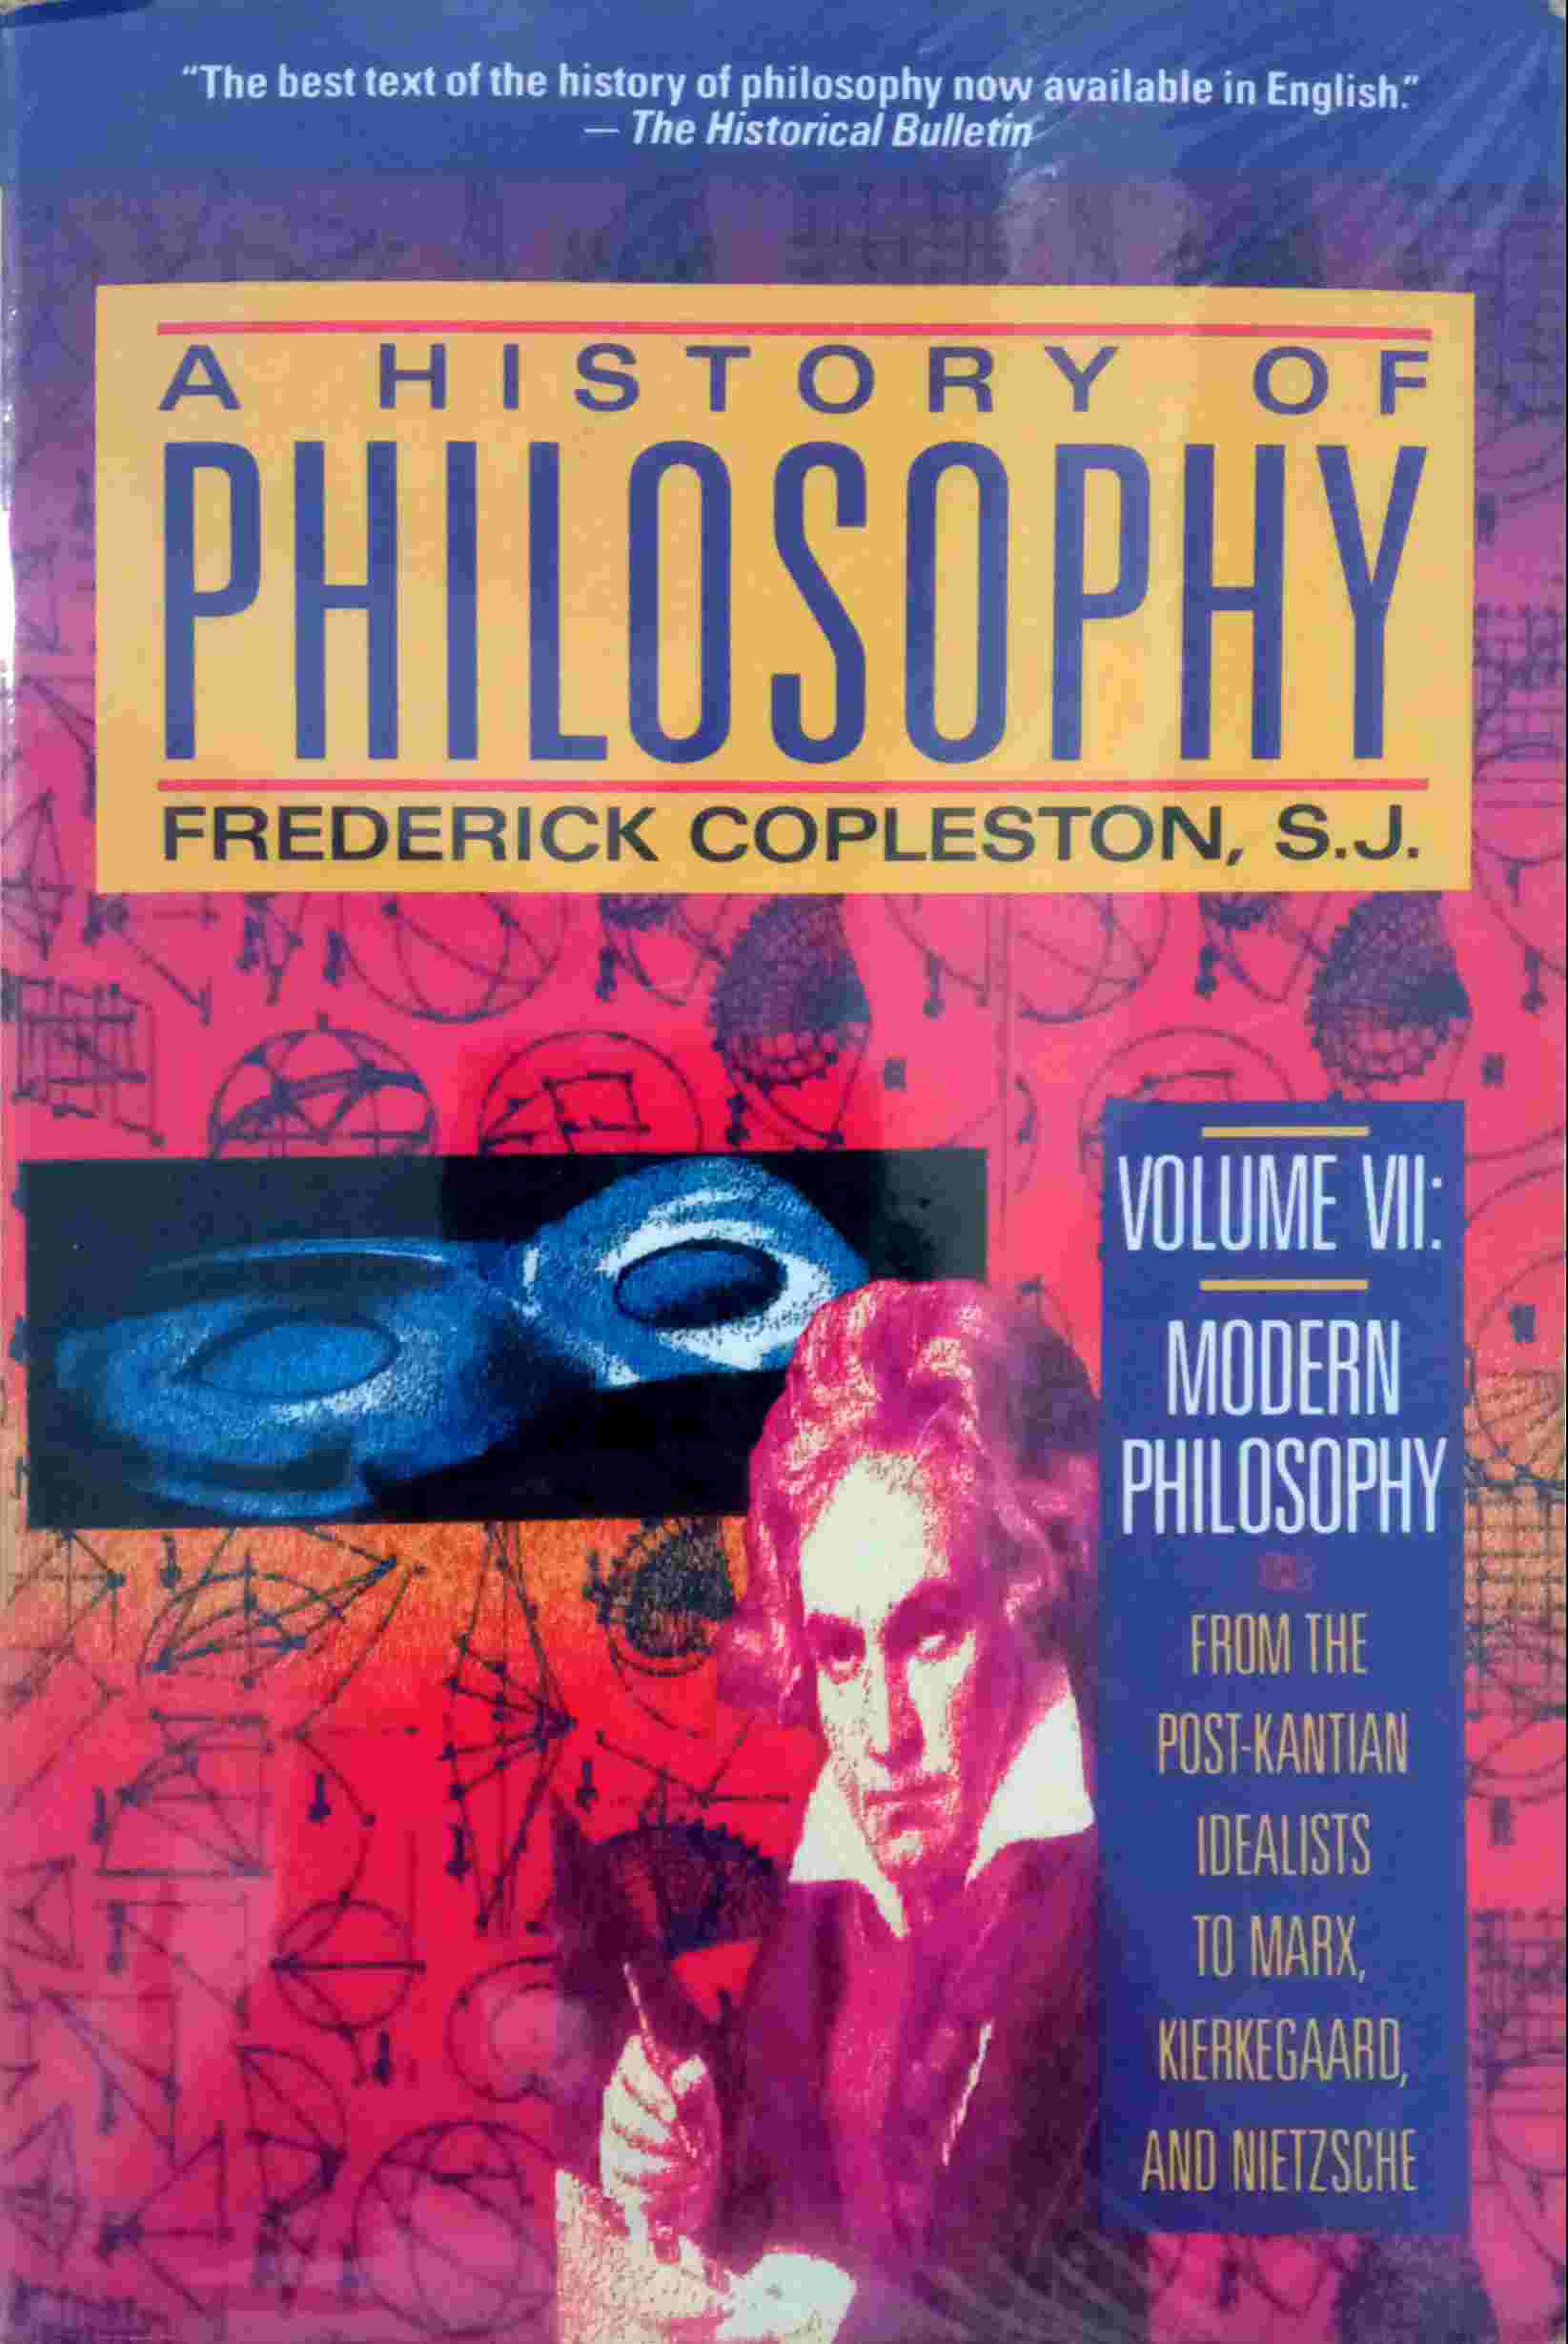 A HISTORY OF PHILOSOPHY: MODERN PHILOSOPHY FROM THE POST-KANTIAN IDEALISTS TO MARX, KIERKEGAARD, AND NIETZSCHE